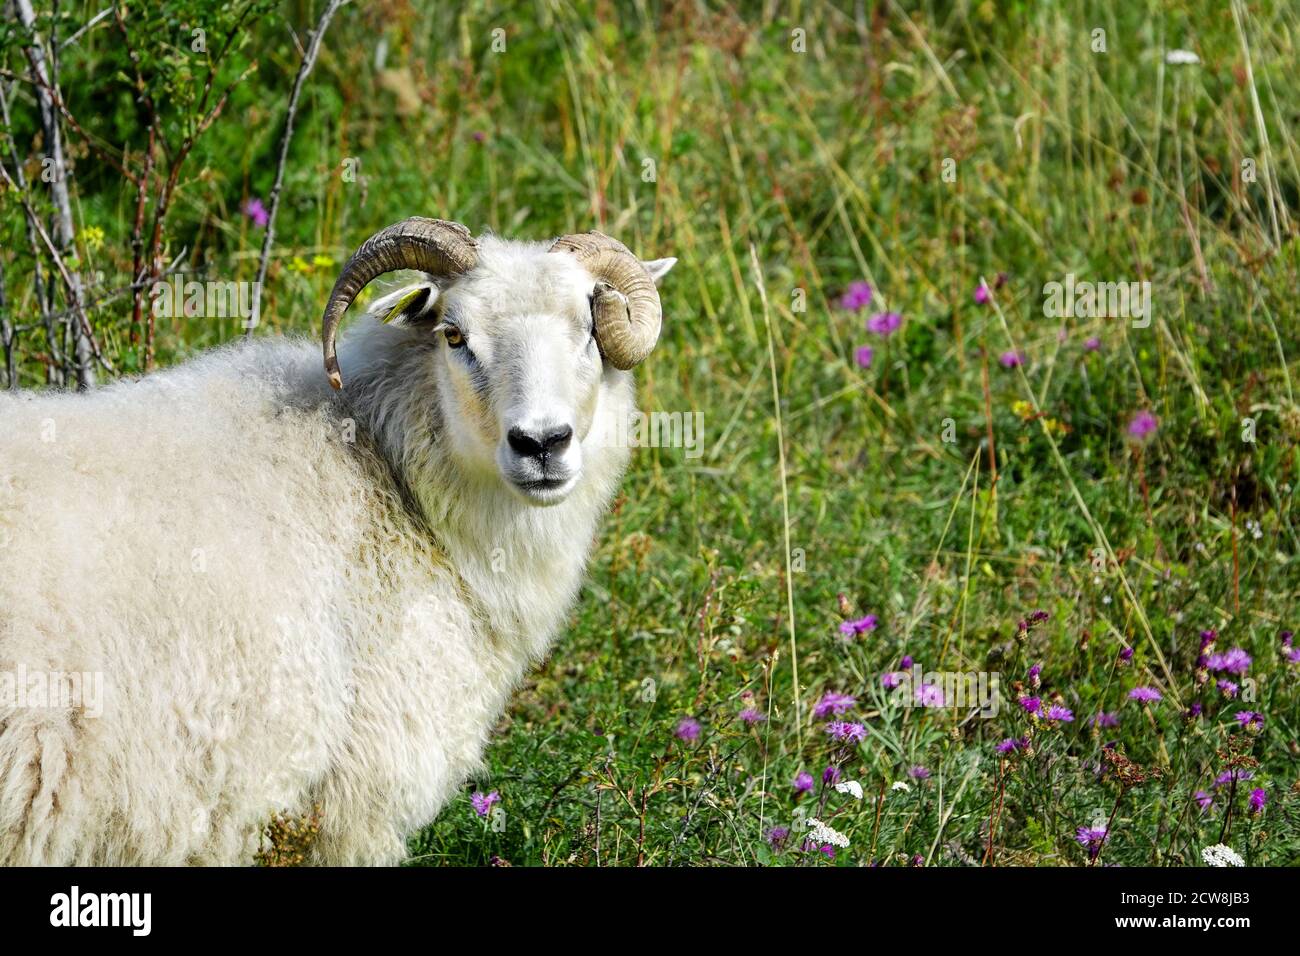 Wild animals with broken horns- sheep portrait. Farmland View of a Woolly Sheep in a Green Field Stock Photo